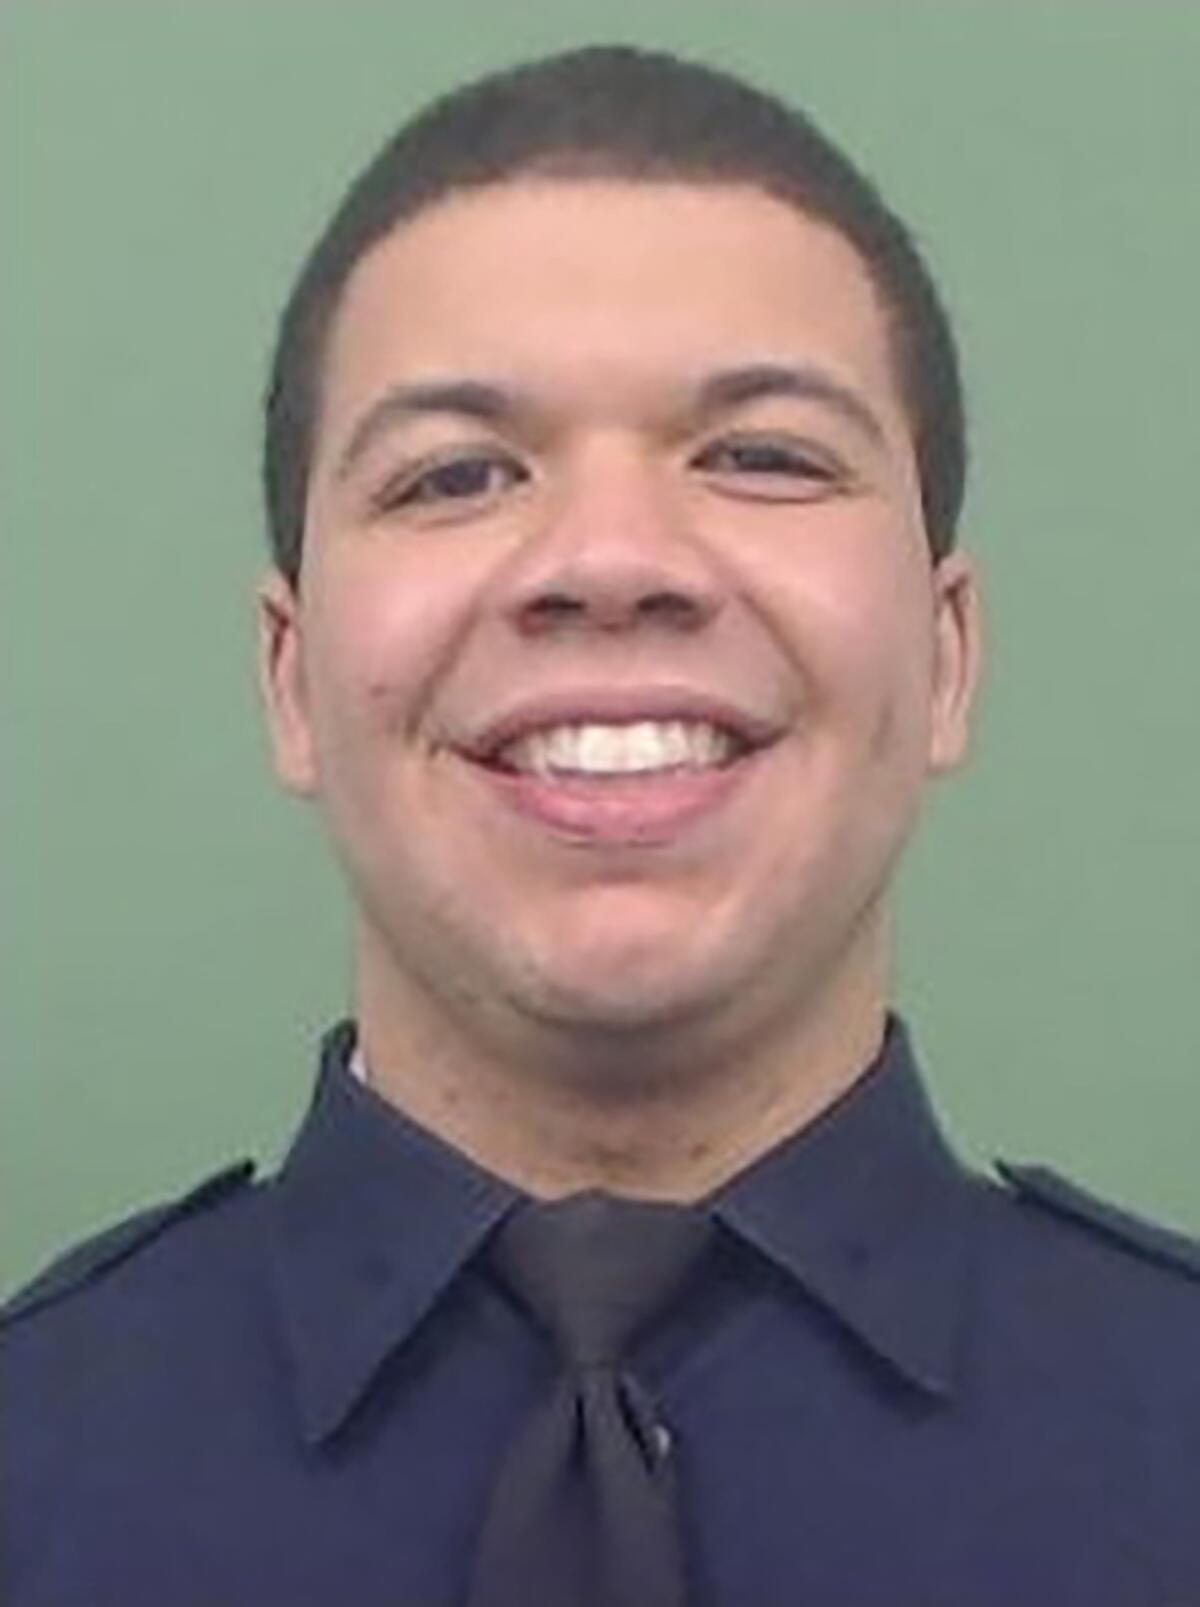 New York Police Department officer Jason Rivera smiles while in uniform